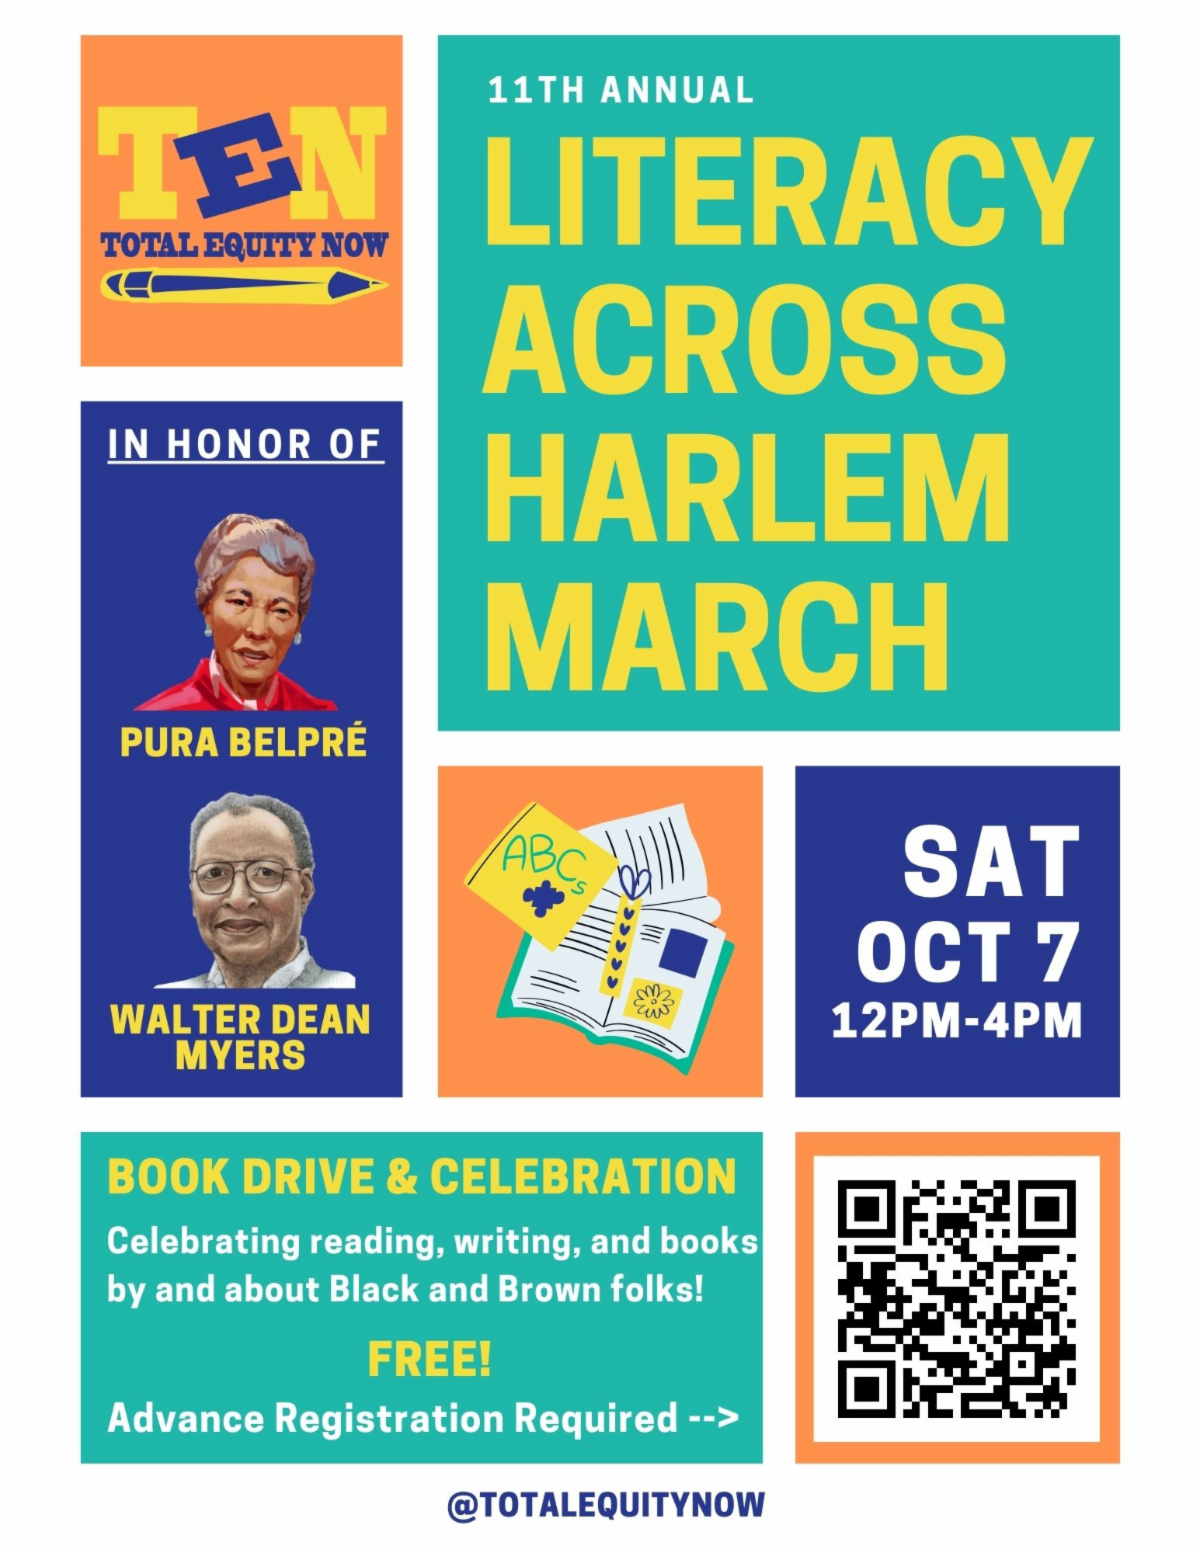 Partner Event: 11th Annual Literacy Across Harlem March